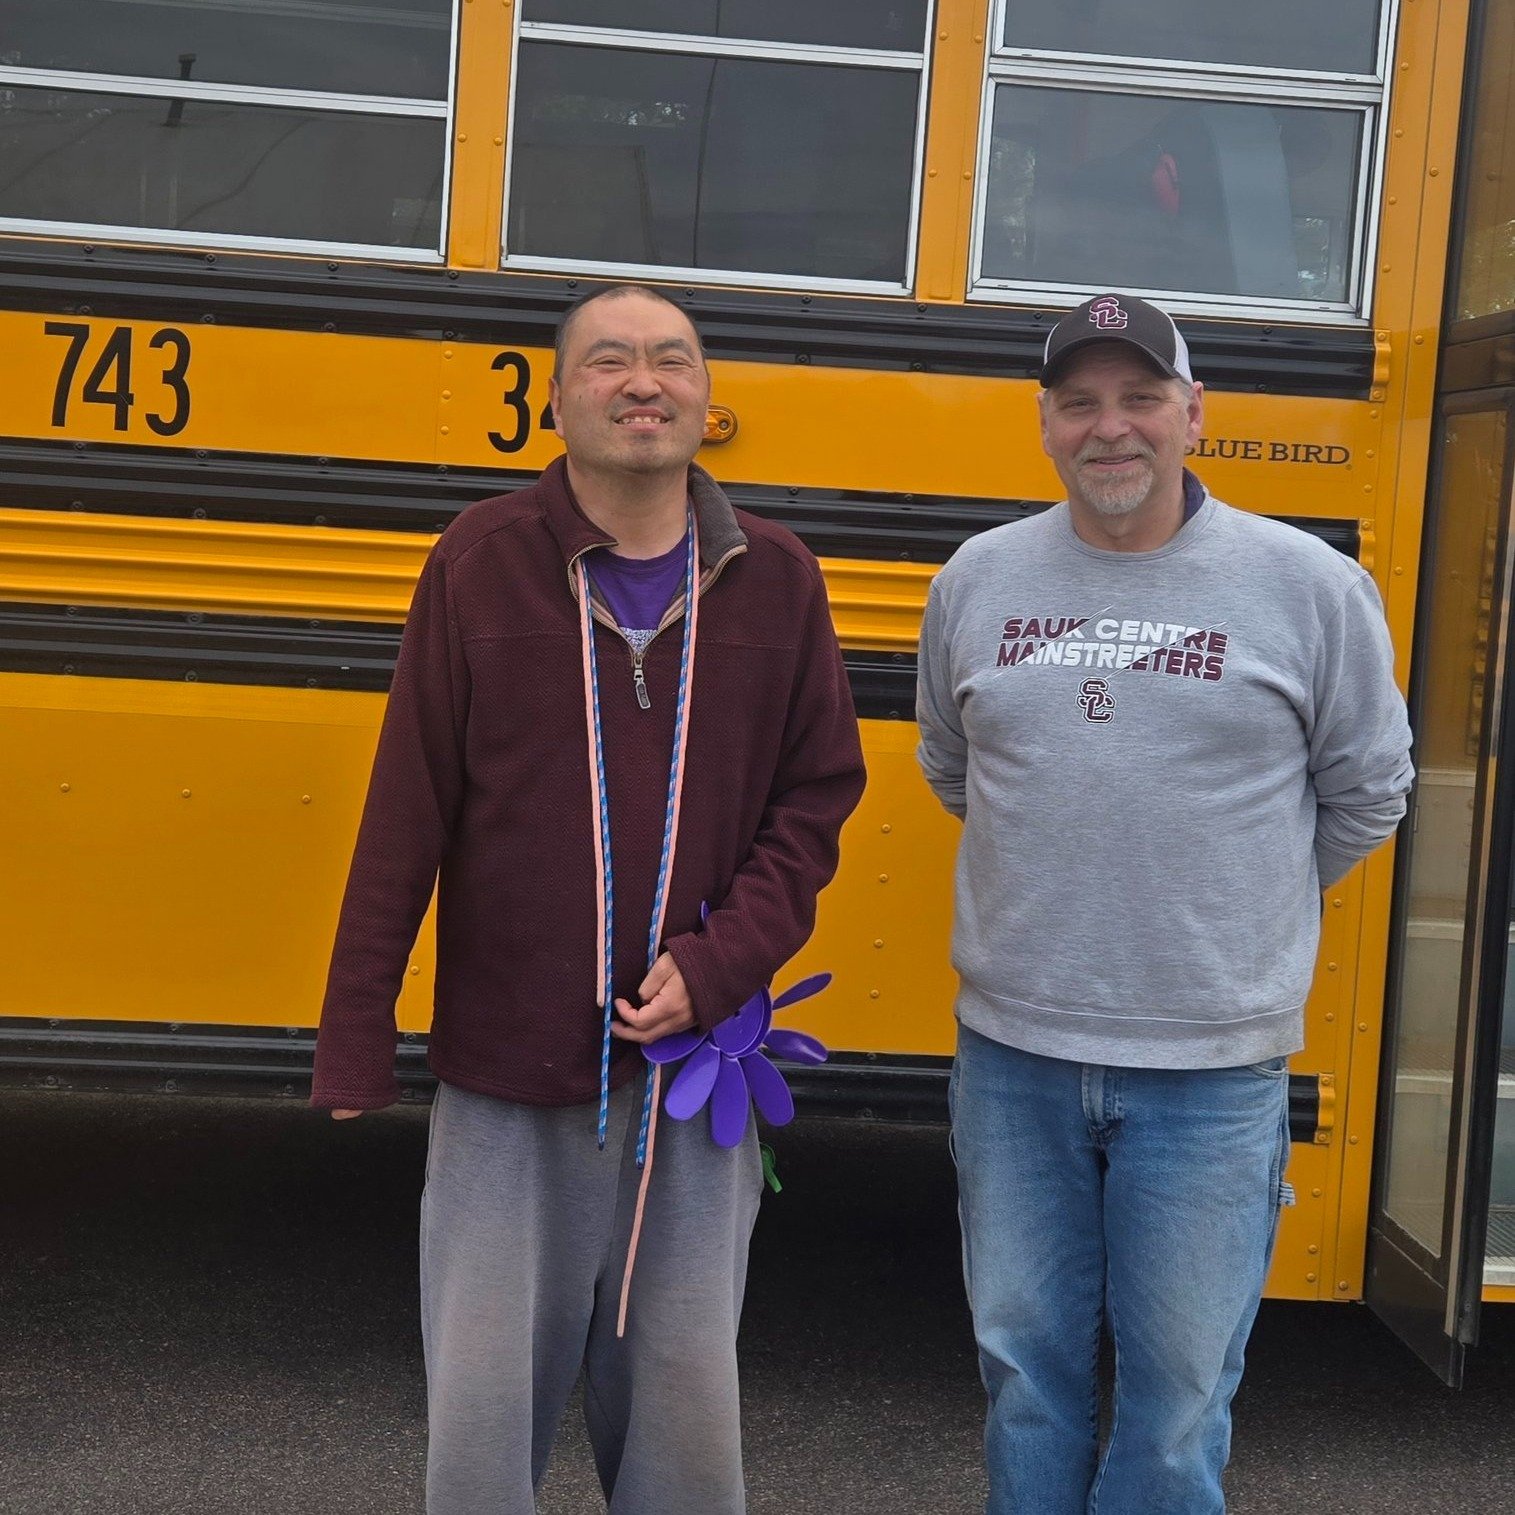 Matthew just LOVES Buses!

Delaine took him out to visit the Bus Garage - this has become an annual thing for Matthew. Jon, the Transportation Director is so patient &amp; thoughtful, answering all of Matthew's questions, showing him around, touring 